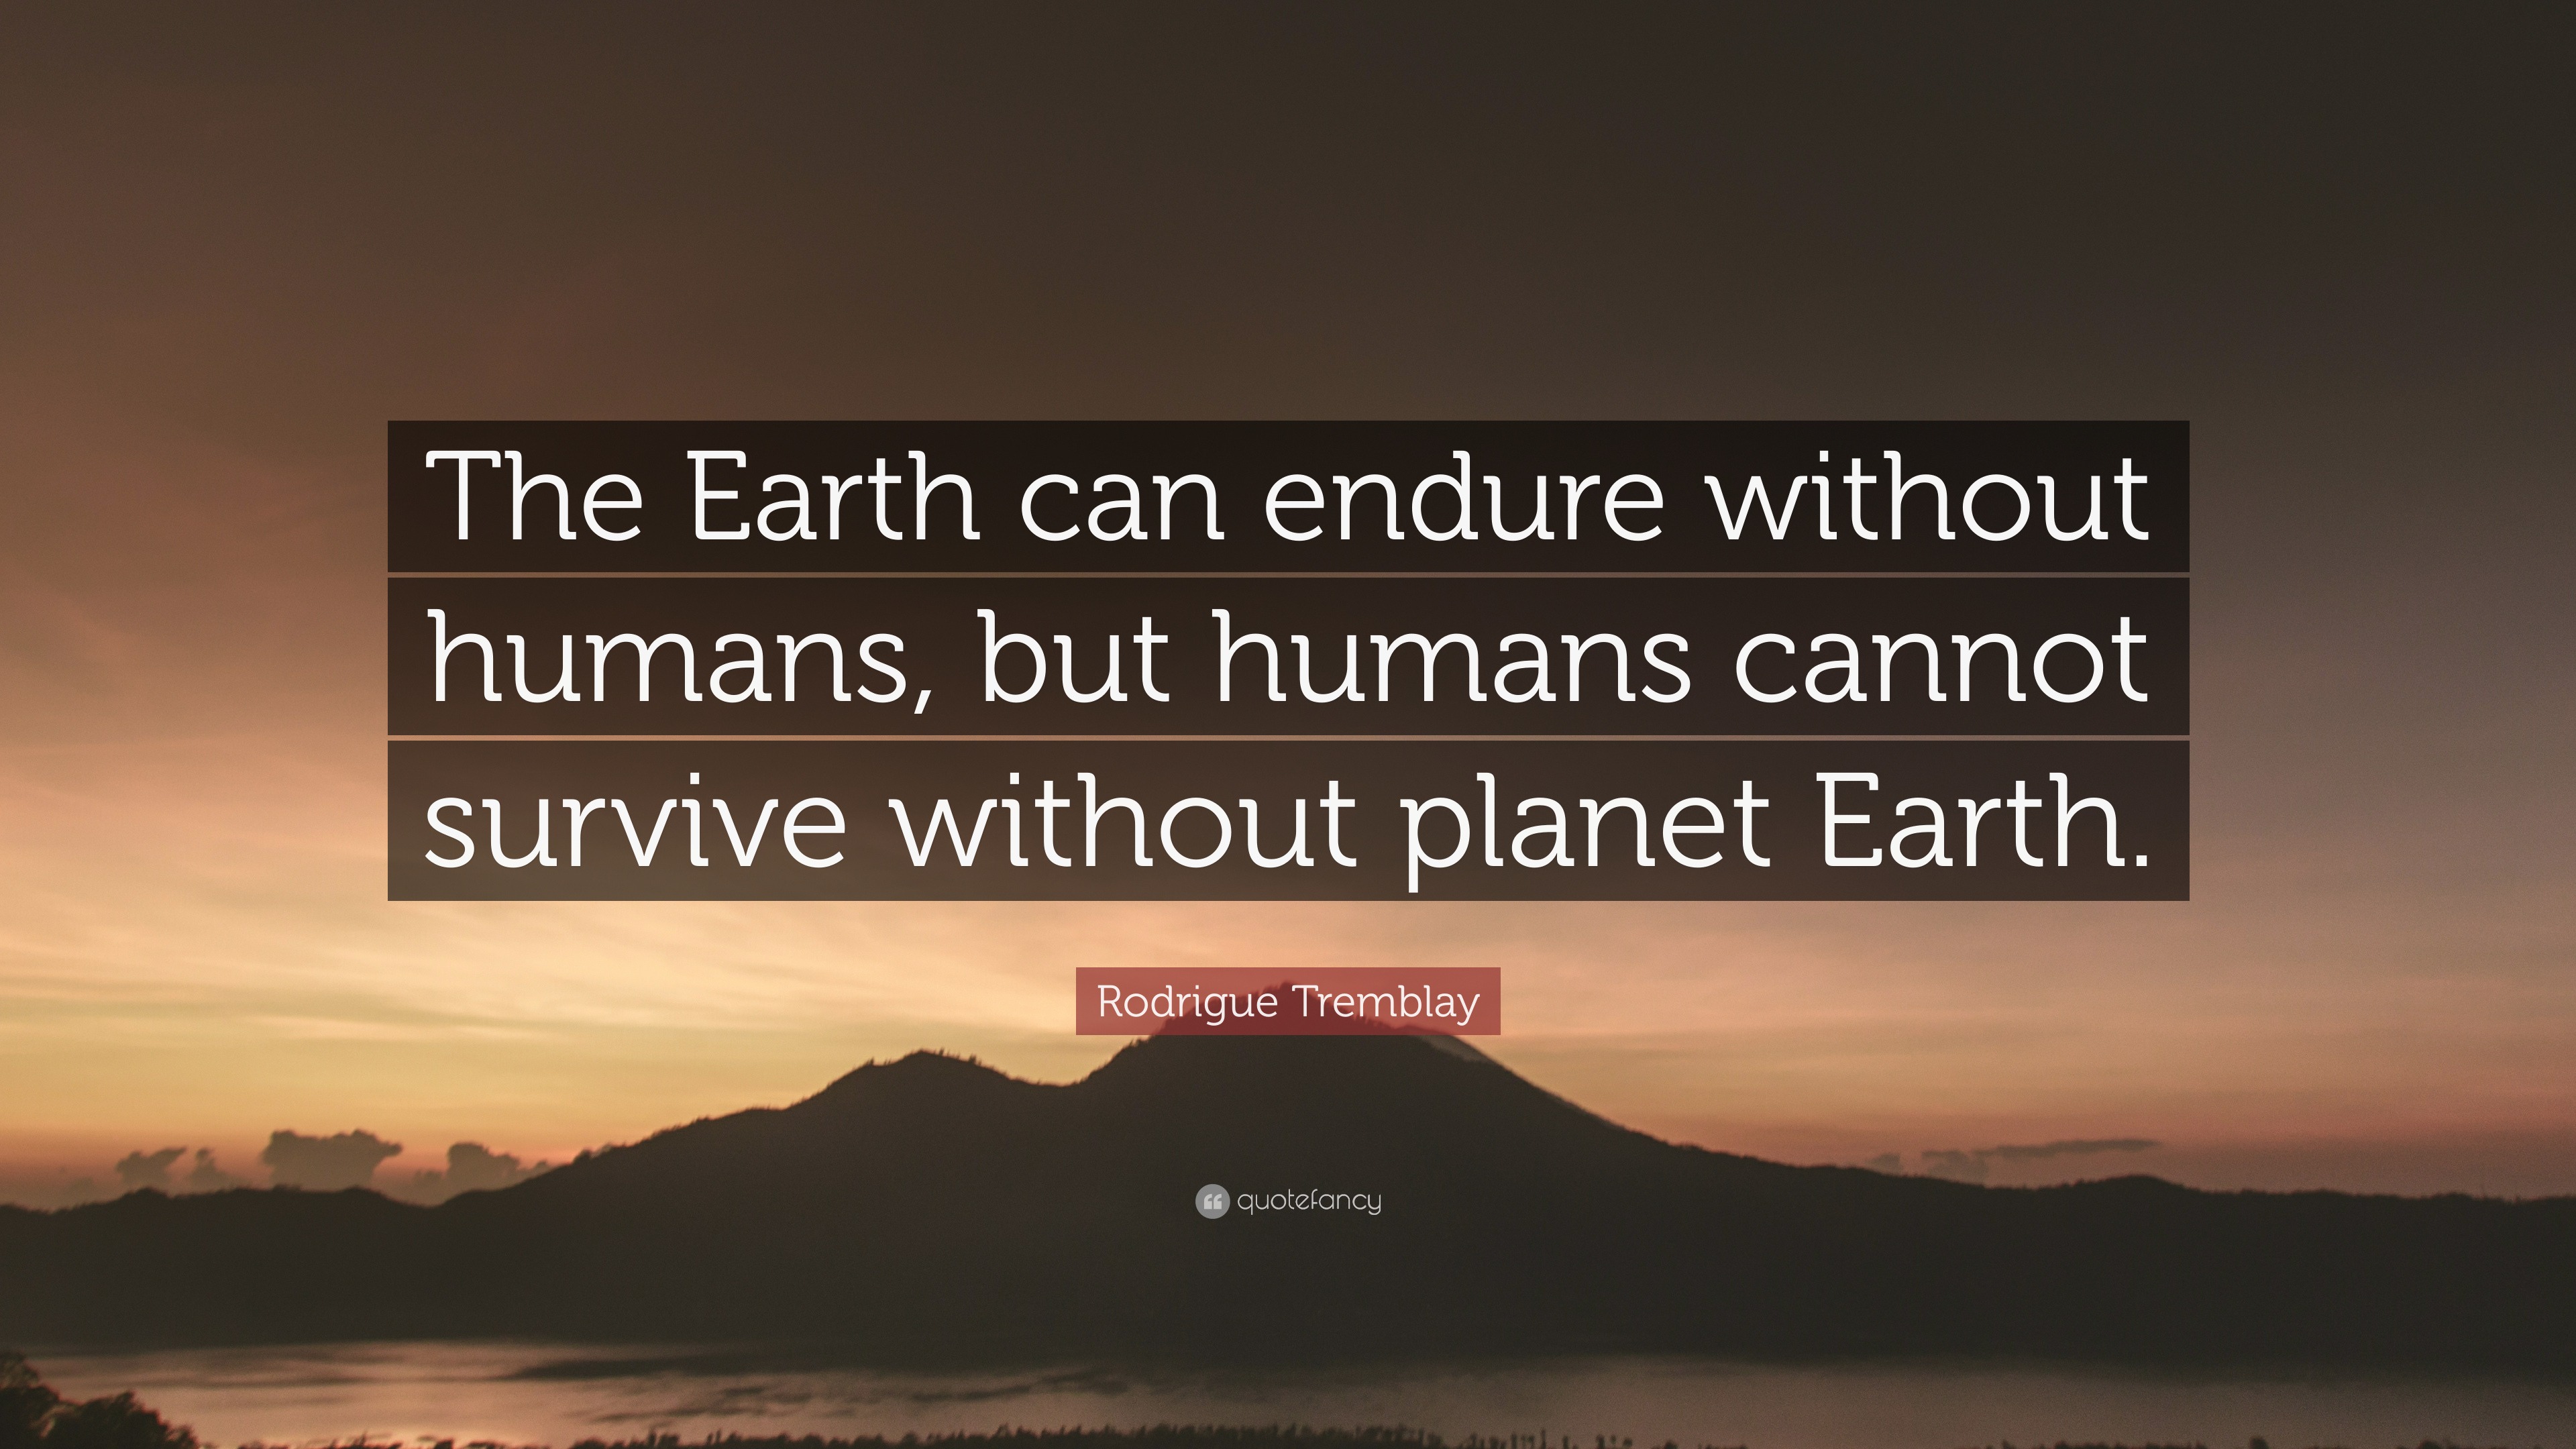 Rodrigue Tremblay Quote “the Earth Can Endure Without Humans But